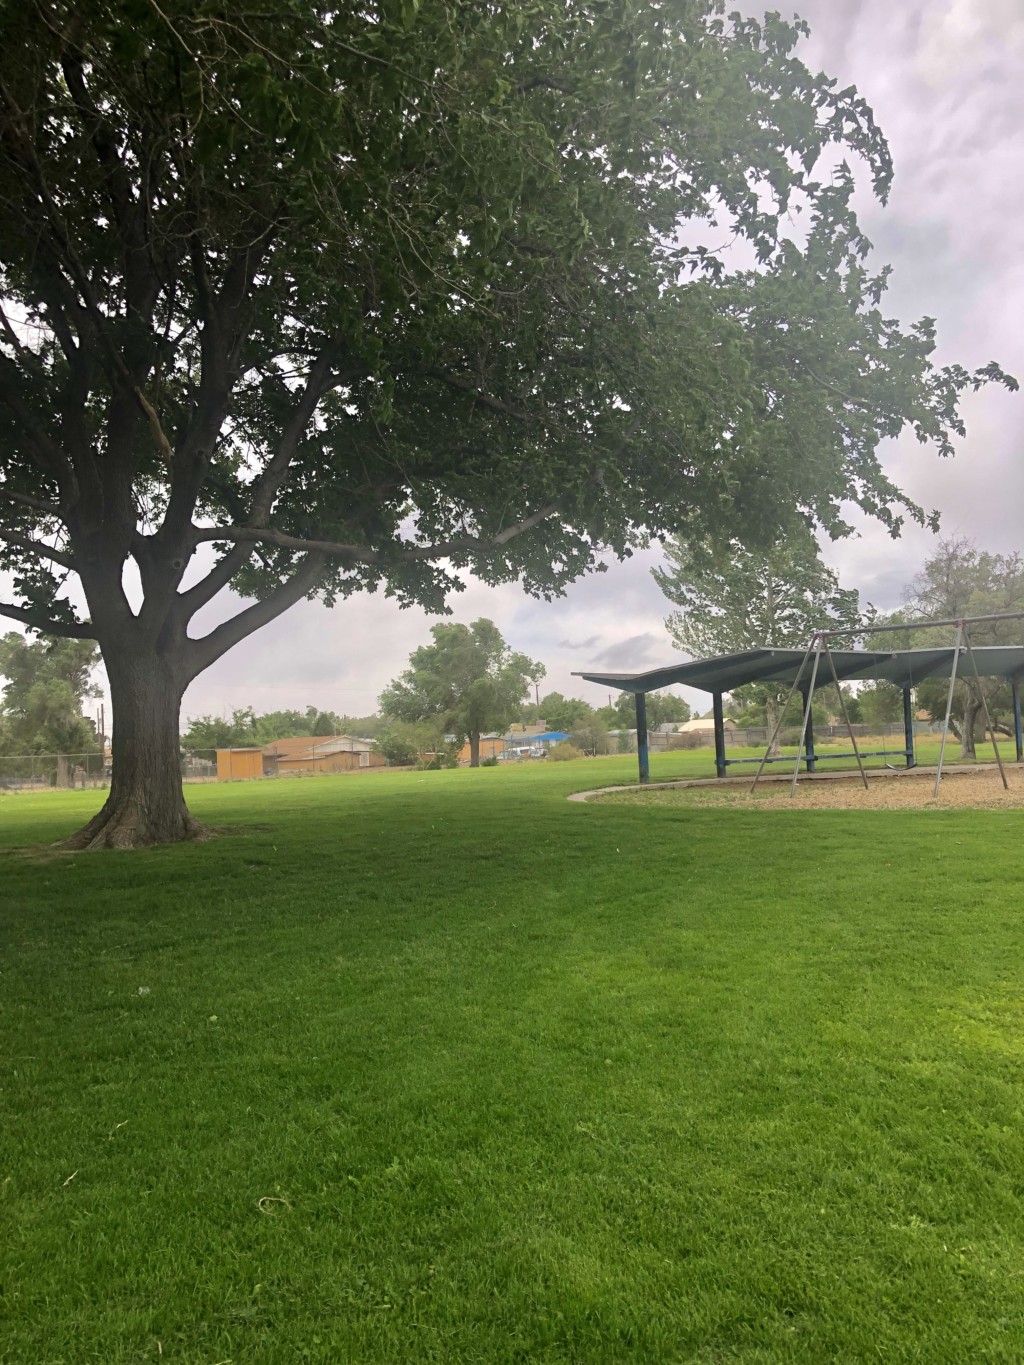 South San Jose | Guide to Parks in the Albuquerque Area